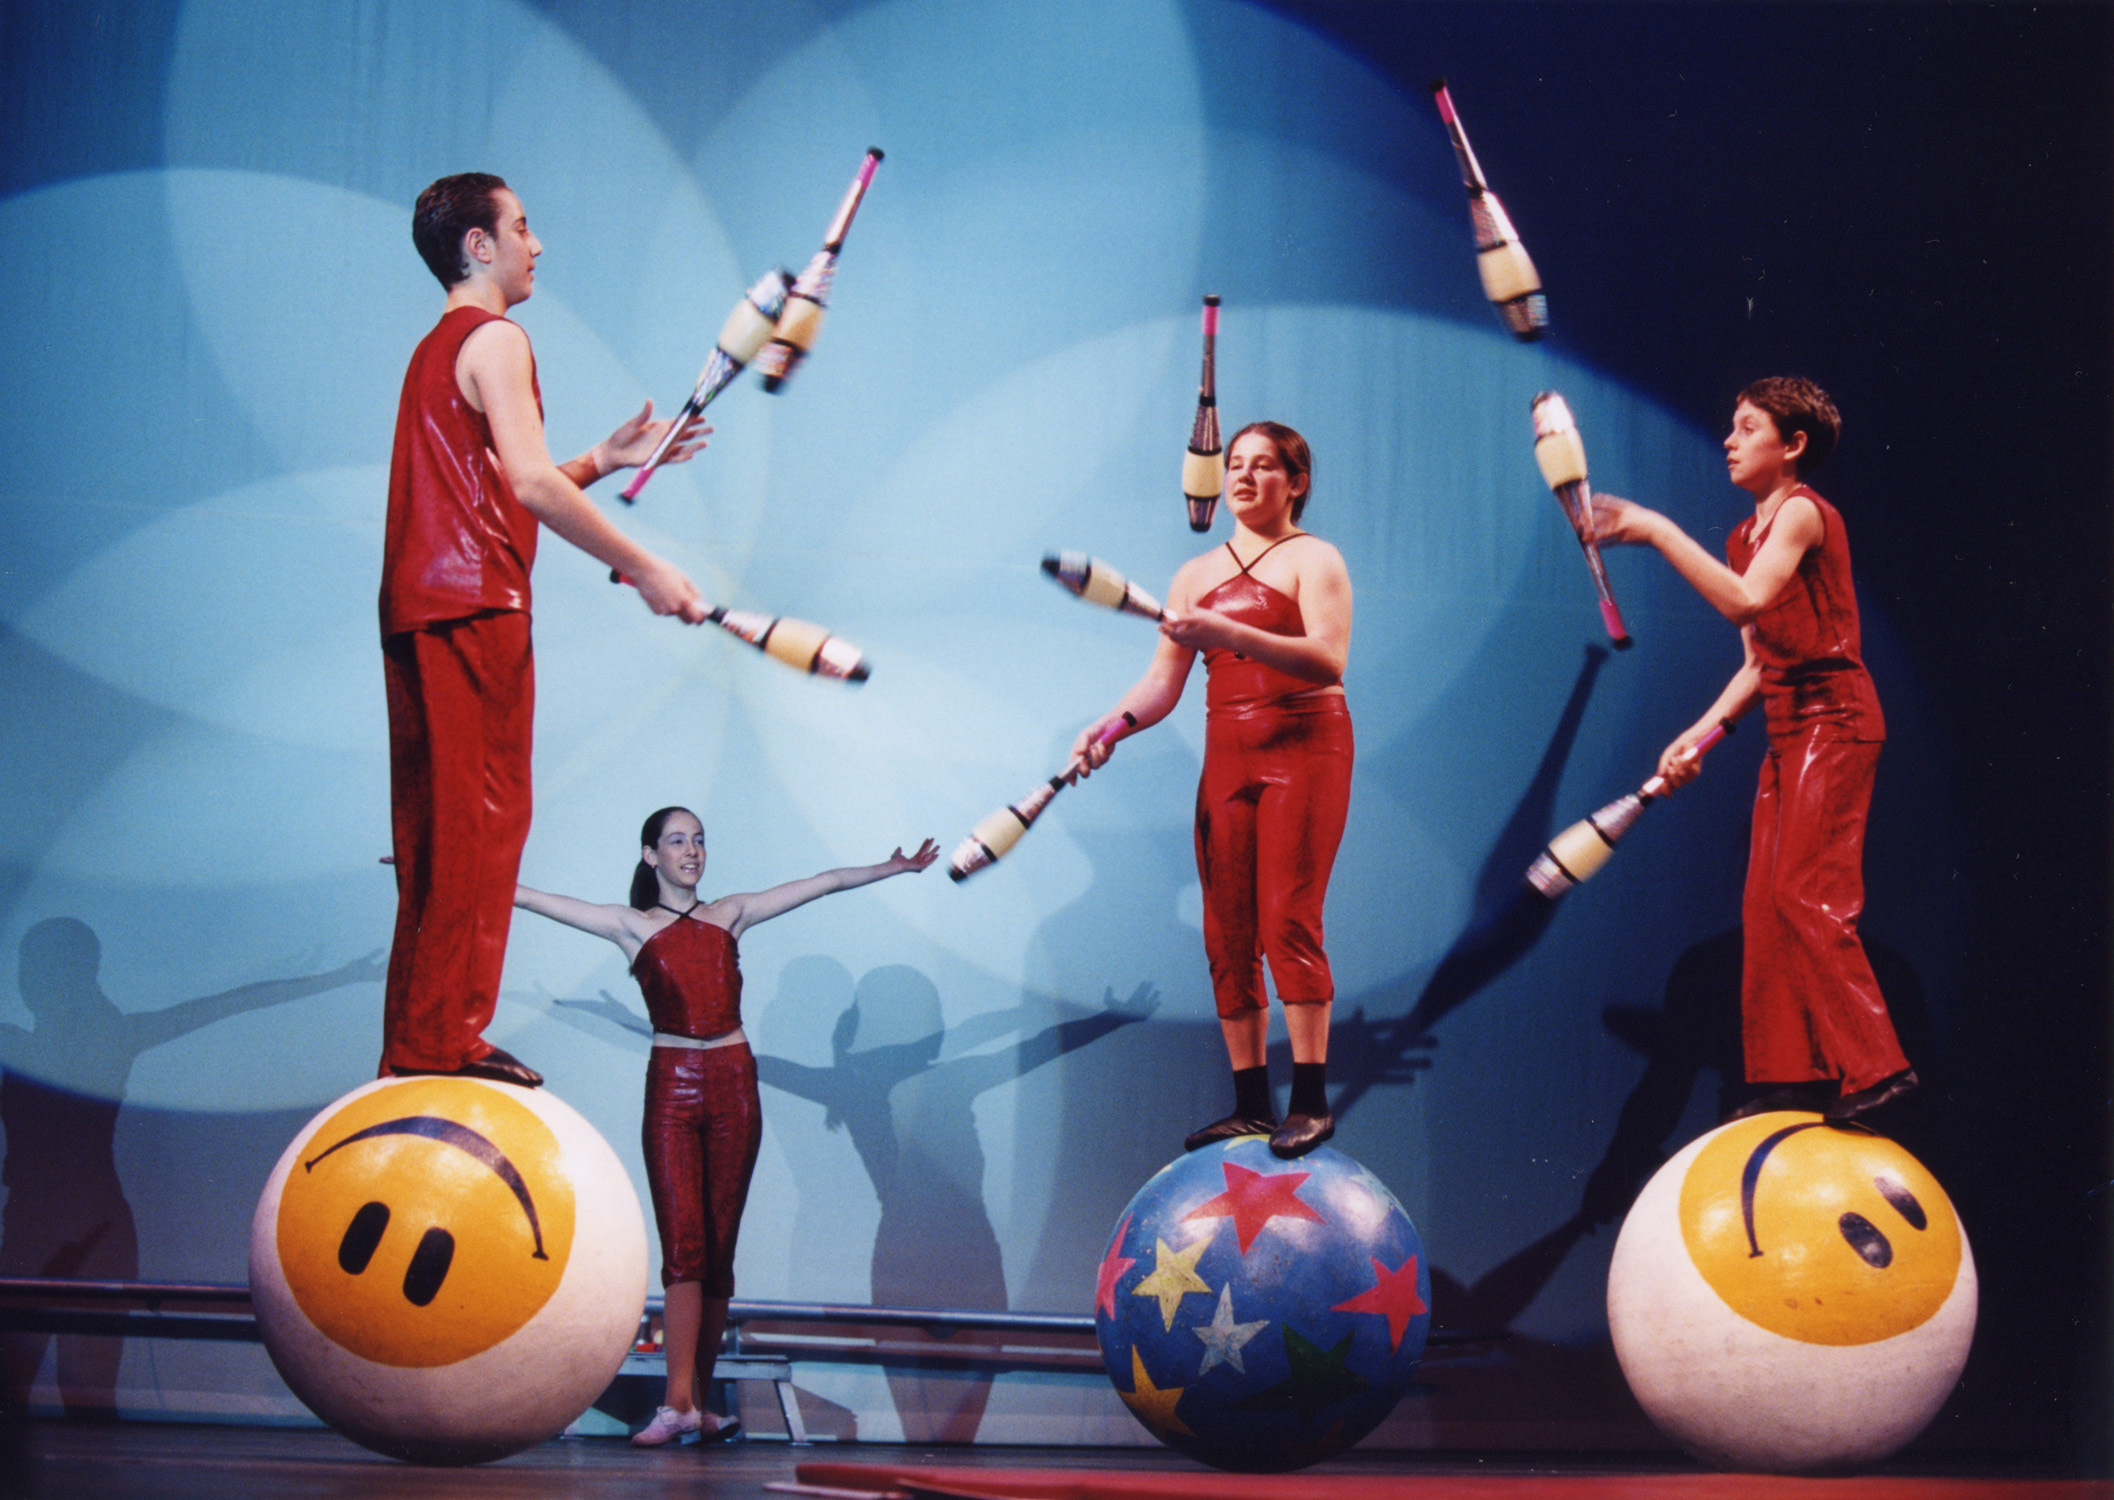 Juggling: Professional jugglers perform while standing on big balls during an event at the circus. 2120x1500 HD Wallpaper.